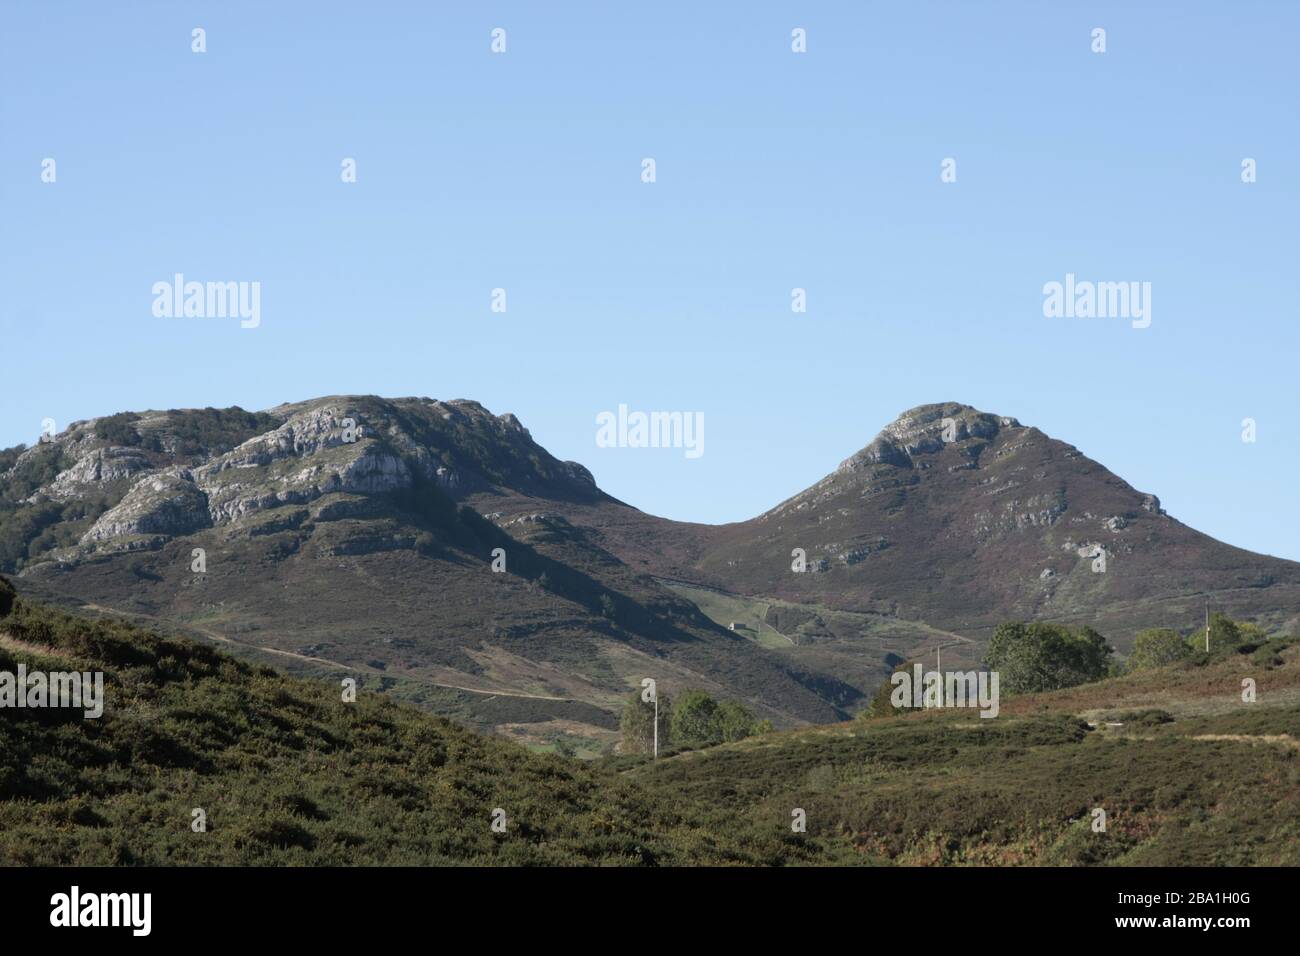 Mountain view with sinuous shapes. Stock Photo